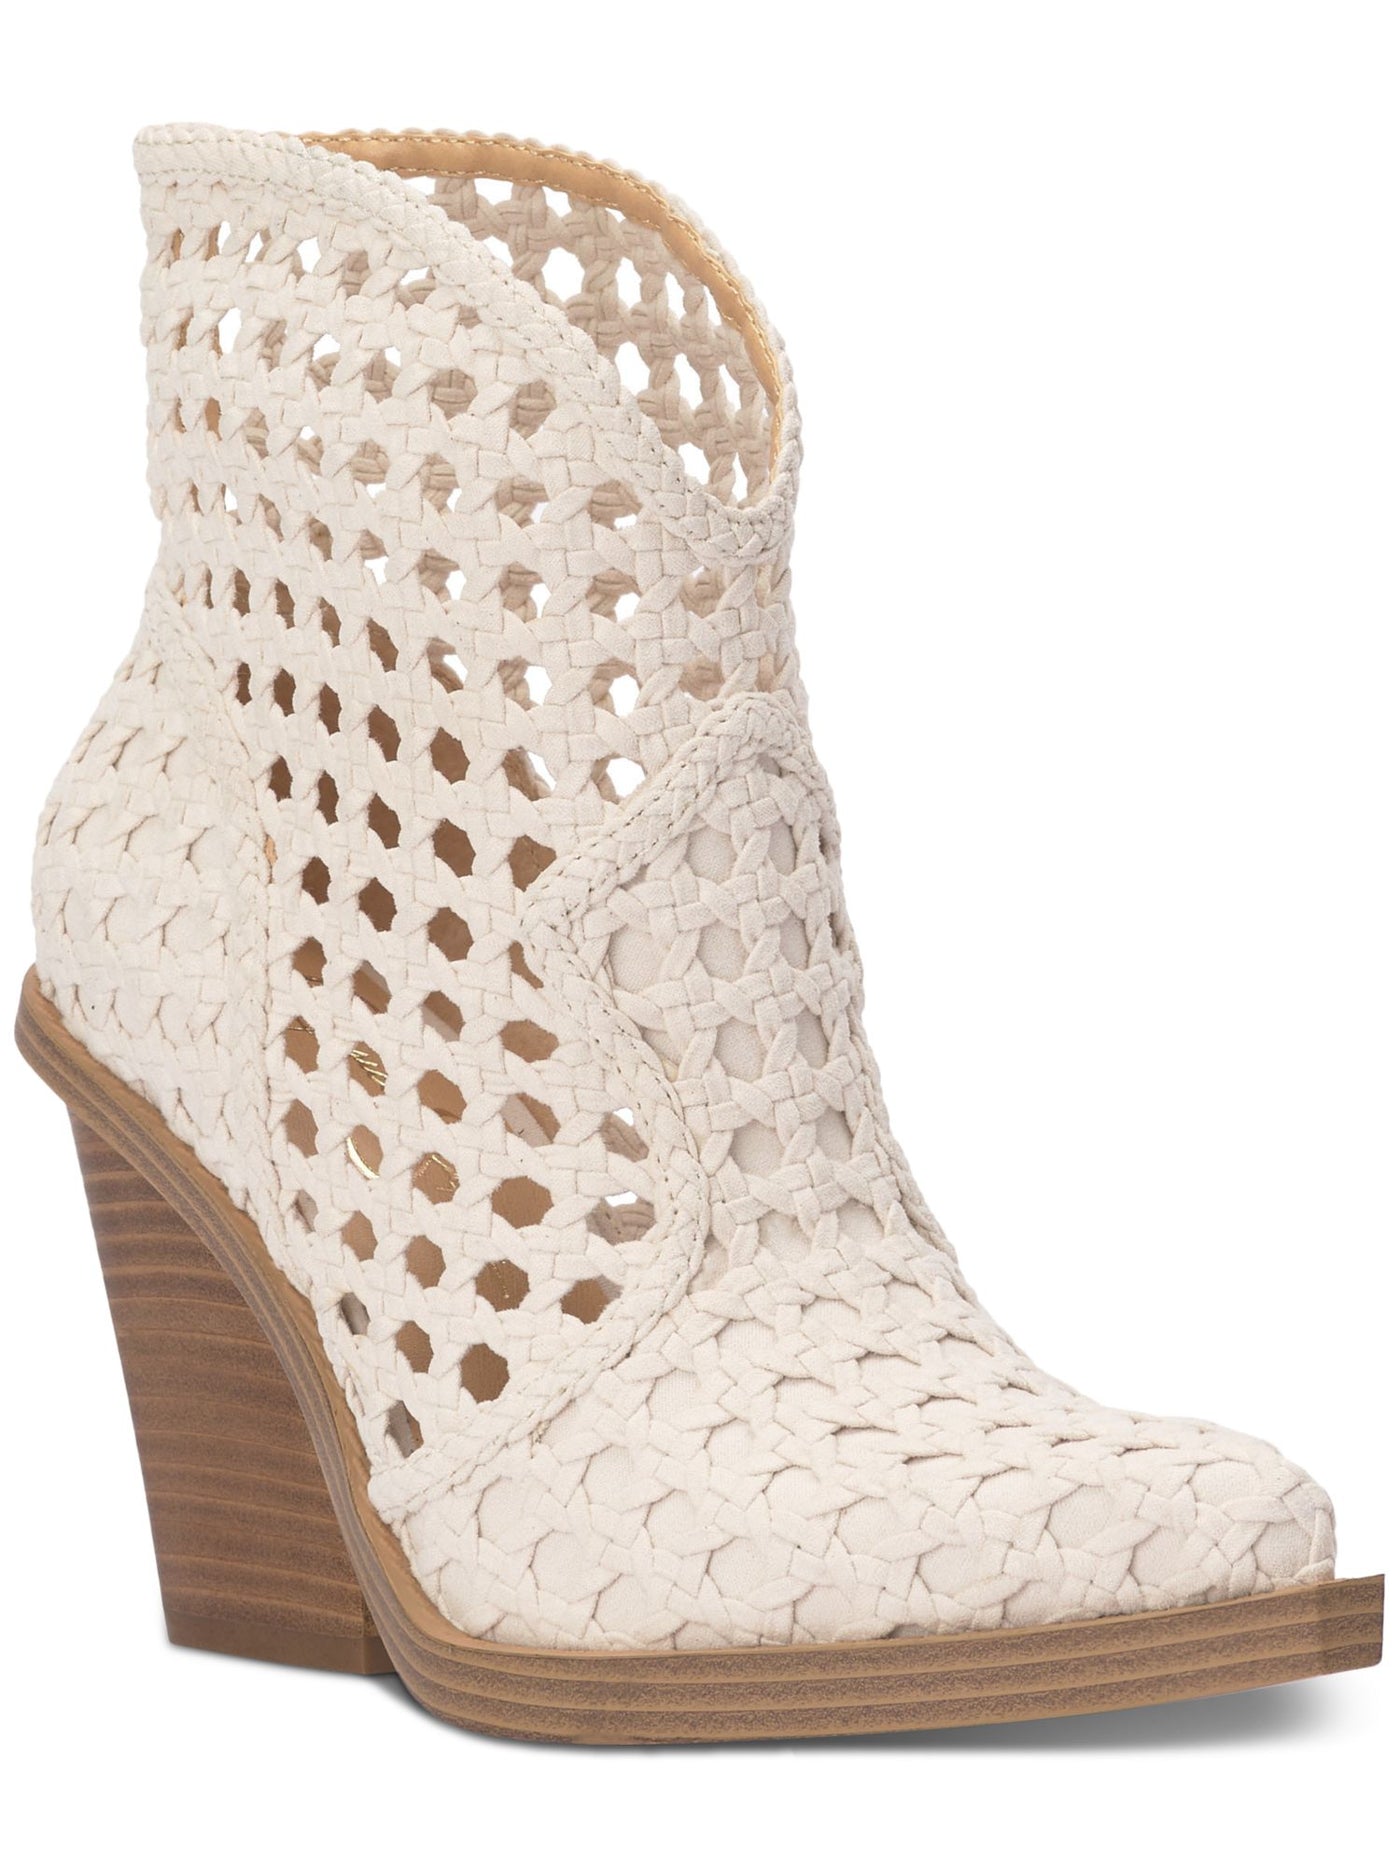 JESSICA SIMPSON Womens Beige Cut Out Padded Lukkah Almond Toe Stacked Heel Booties 9.5 M